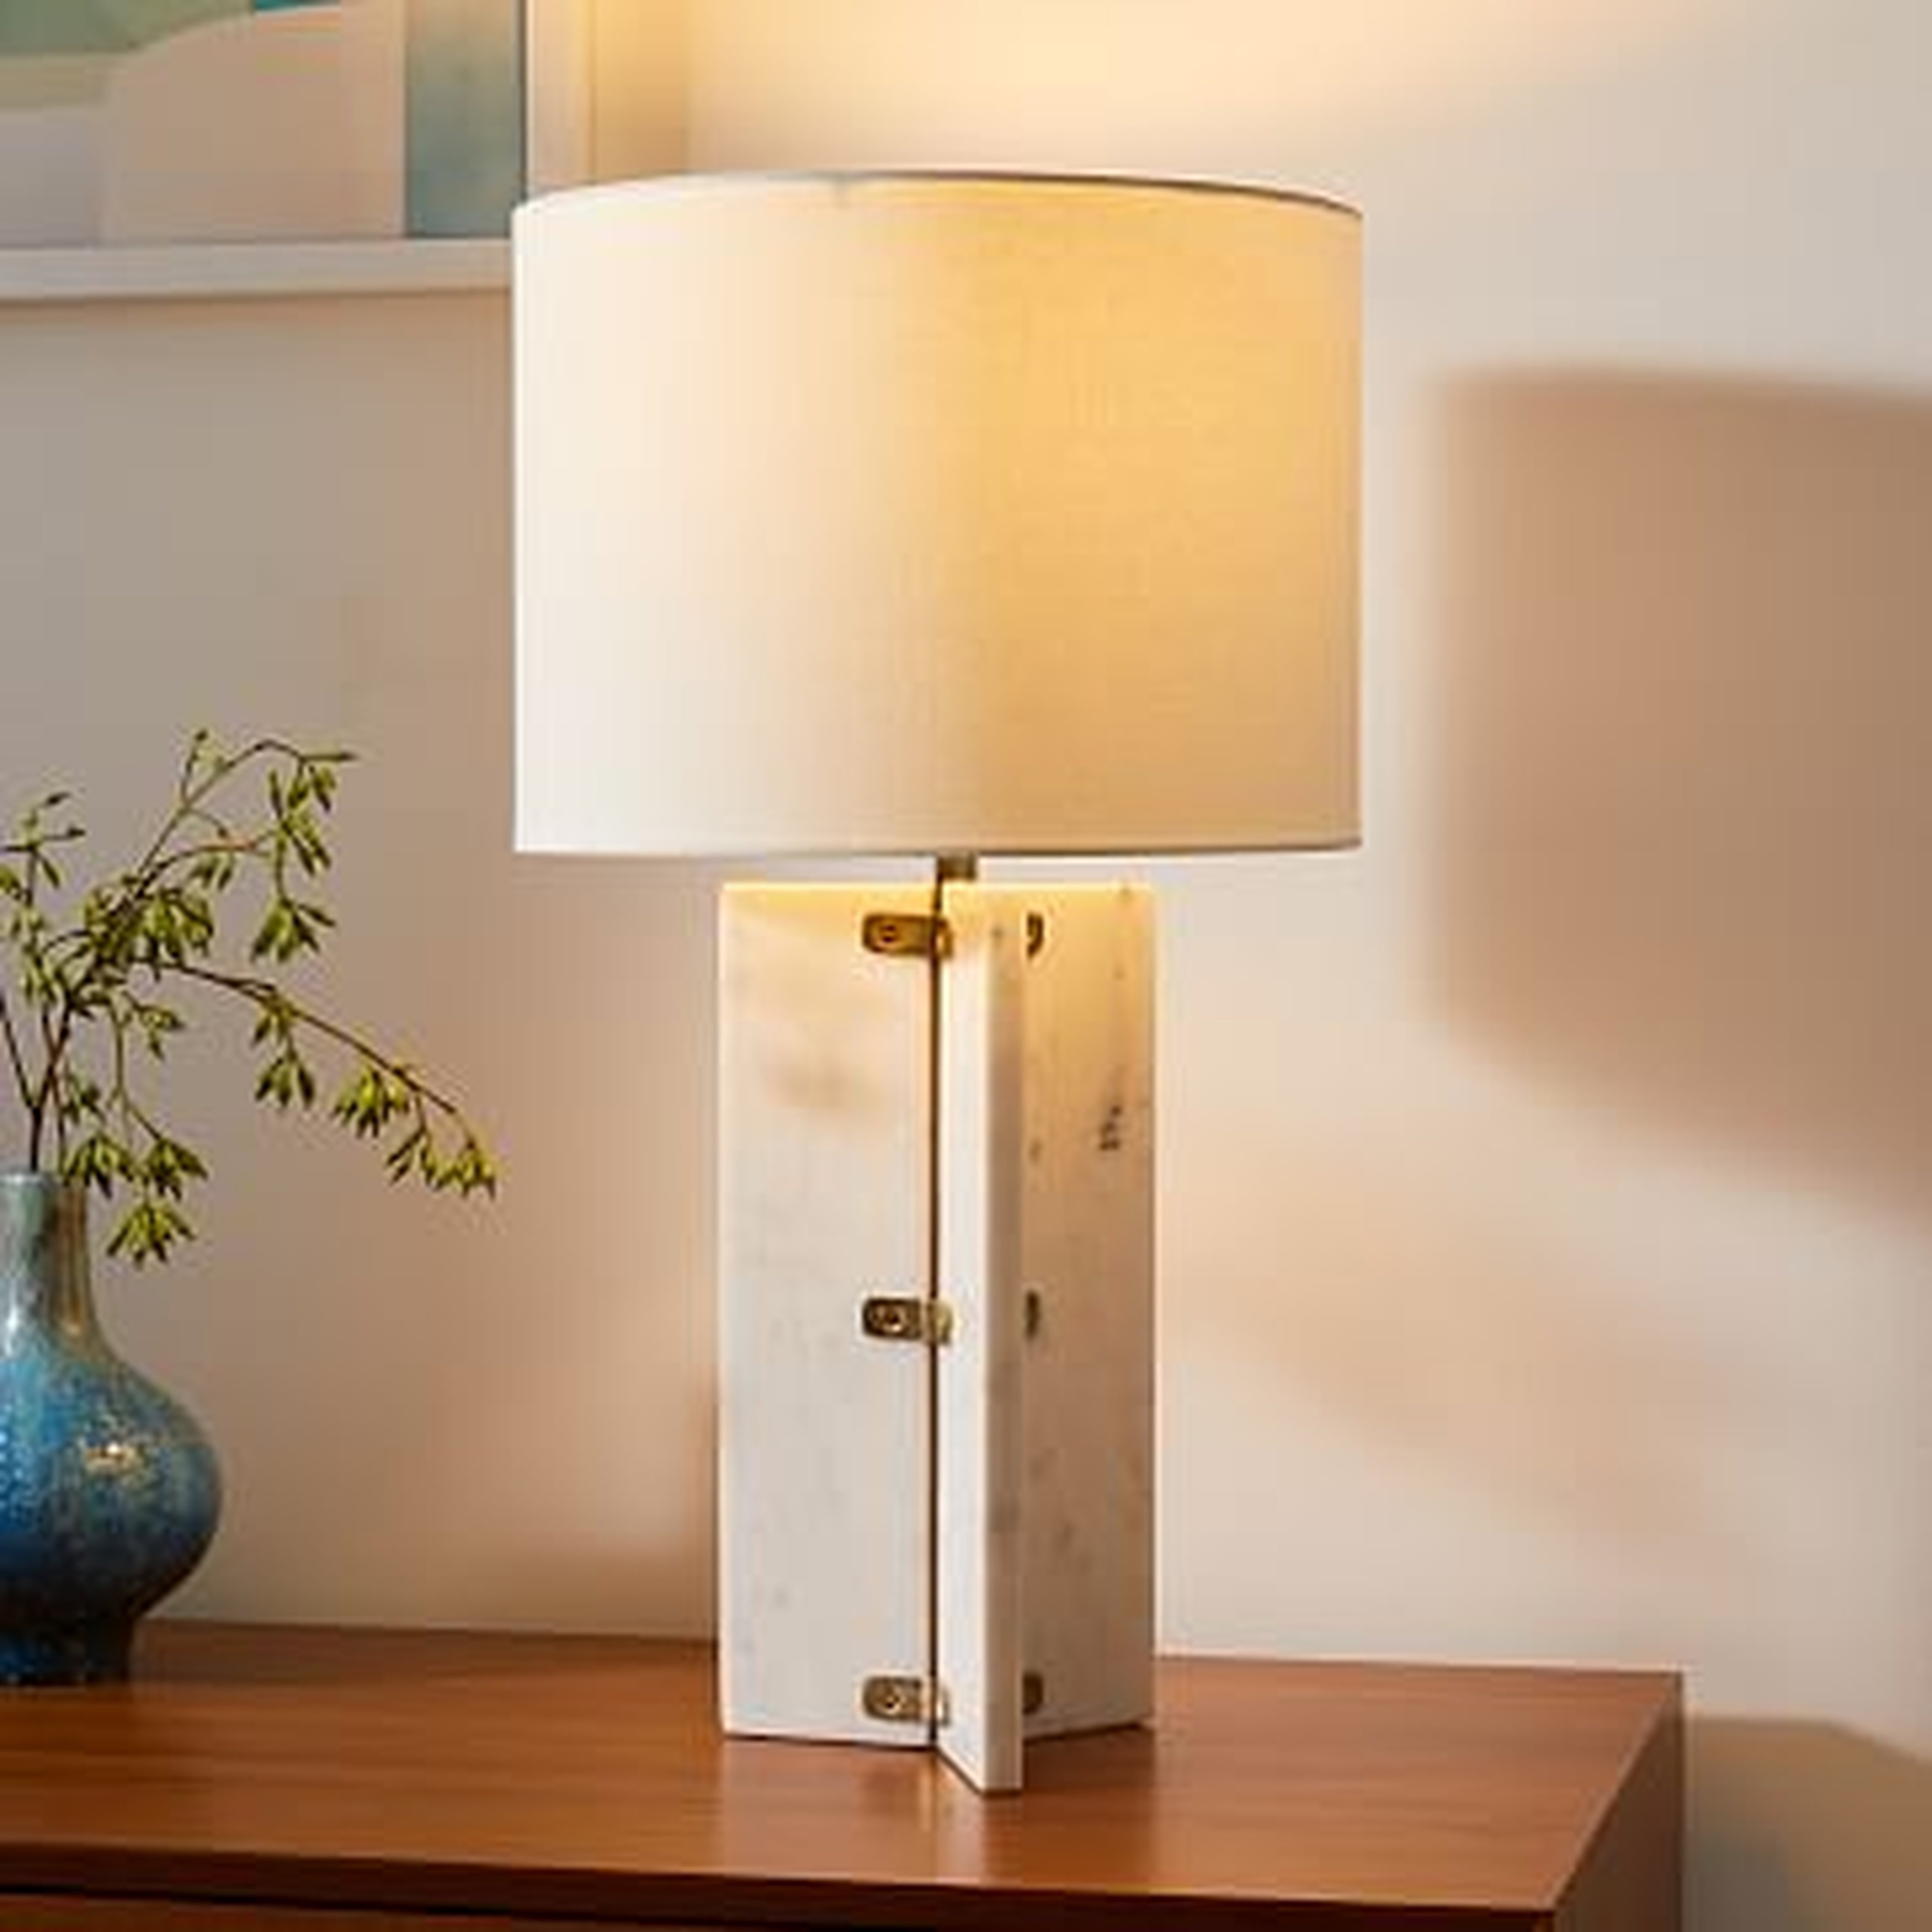 Marble Slab Table Lamp, 22.5", White Marble & Brass - West Elm